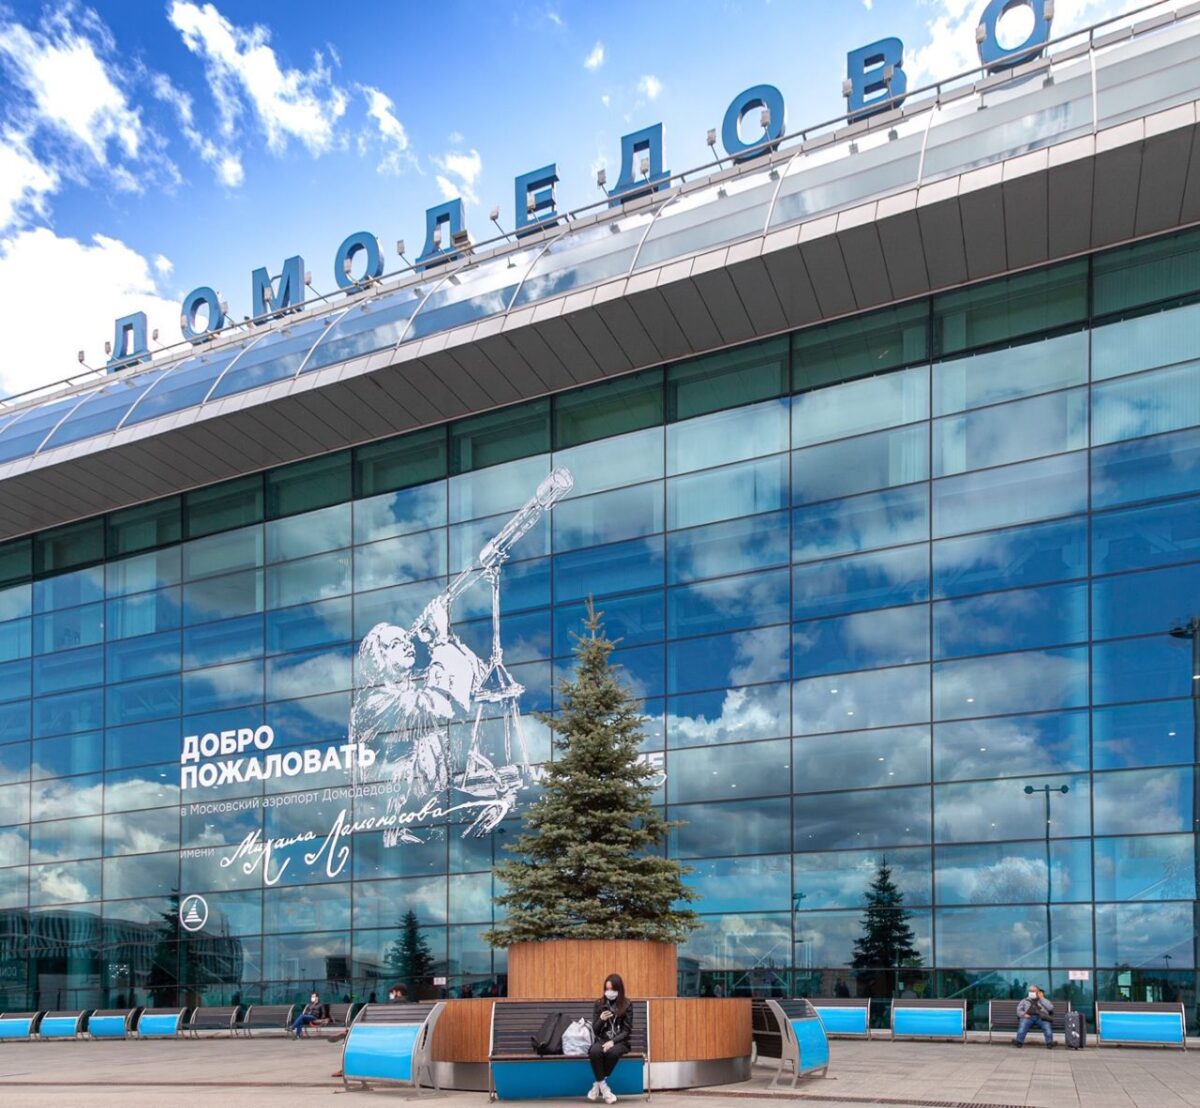 Moscow’s Domodedovo Airport